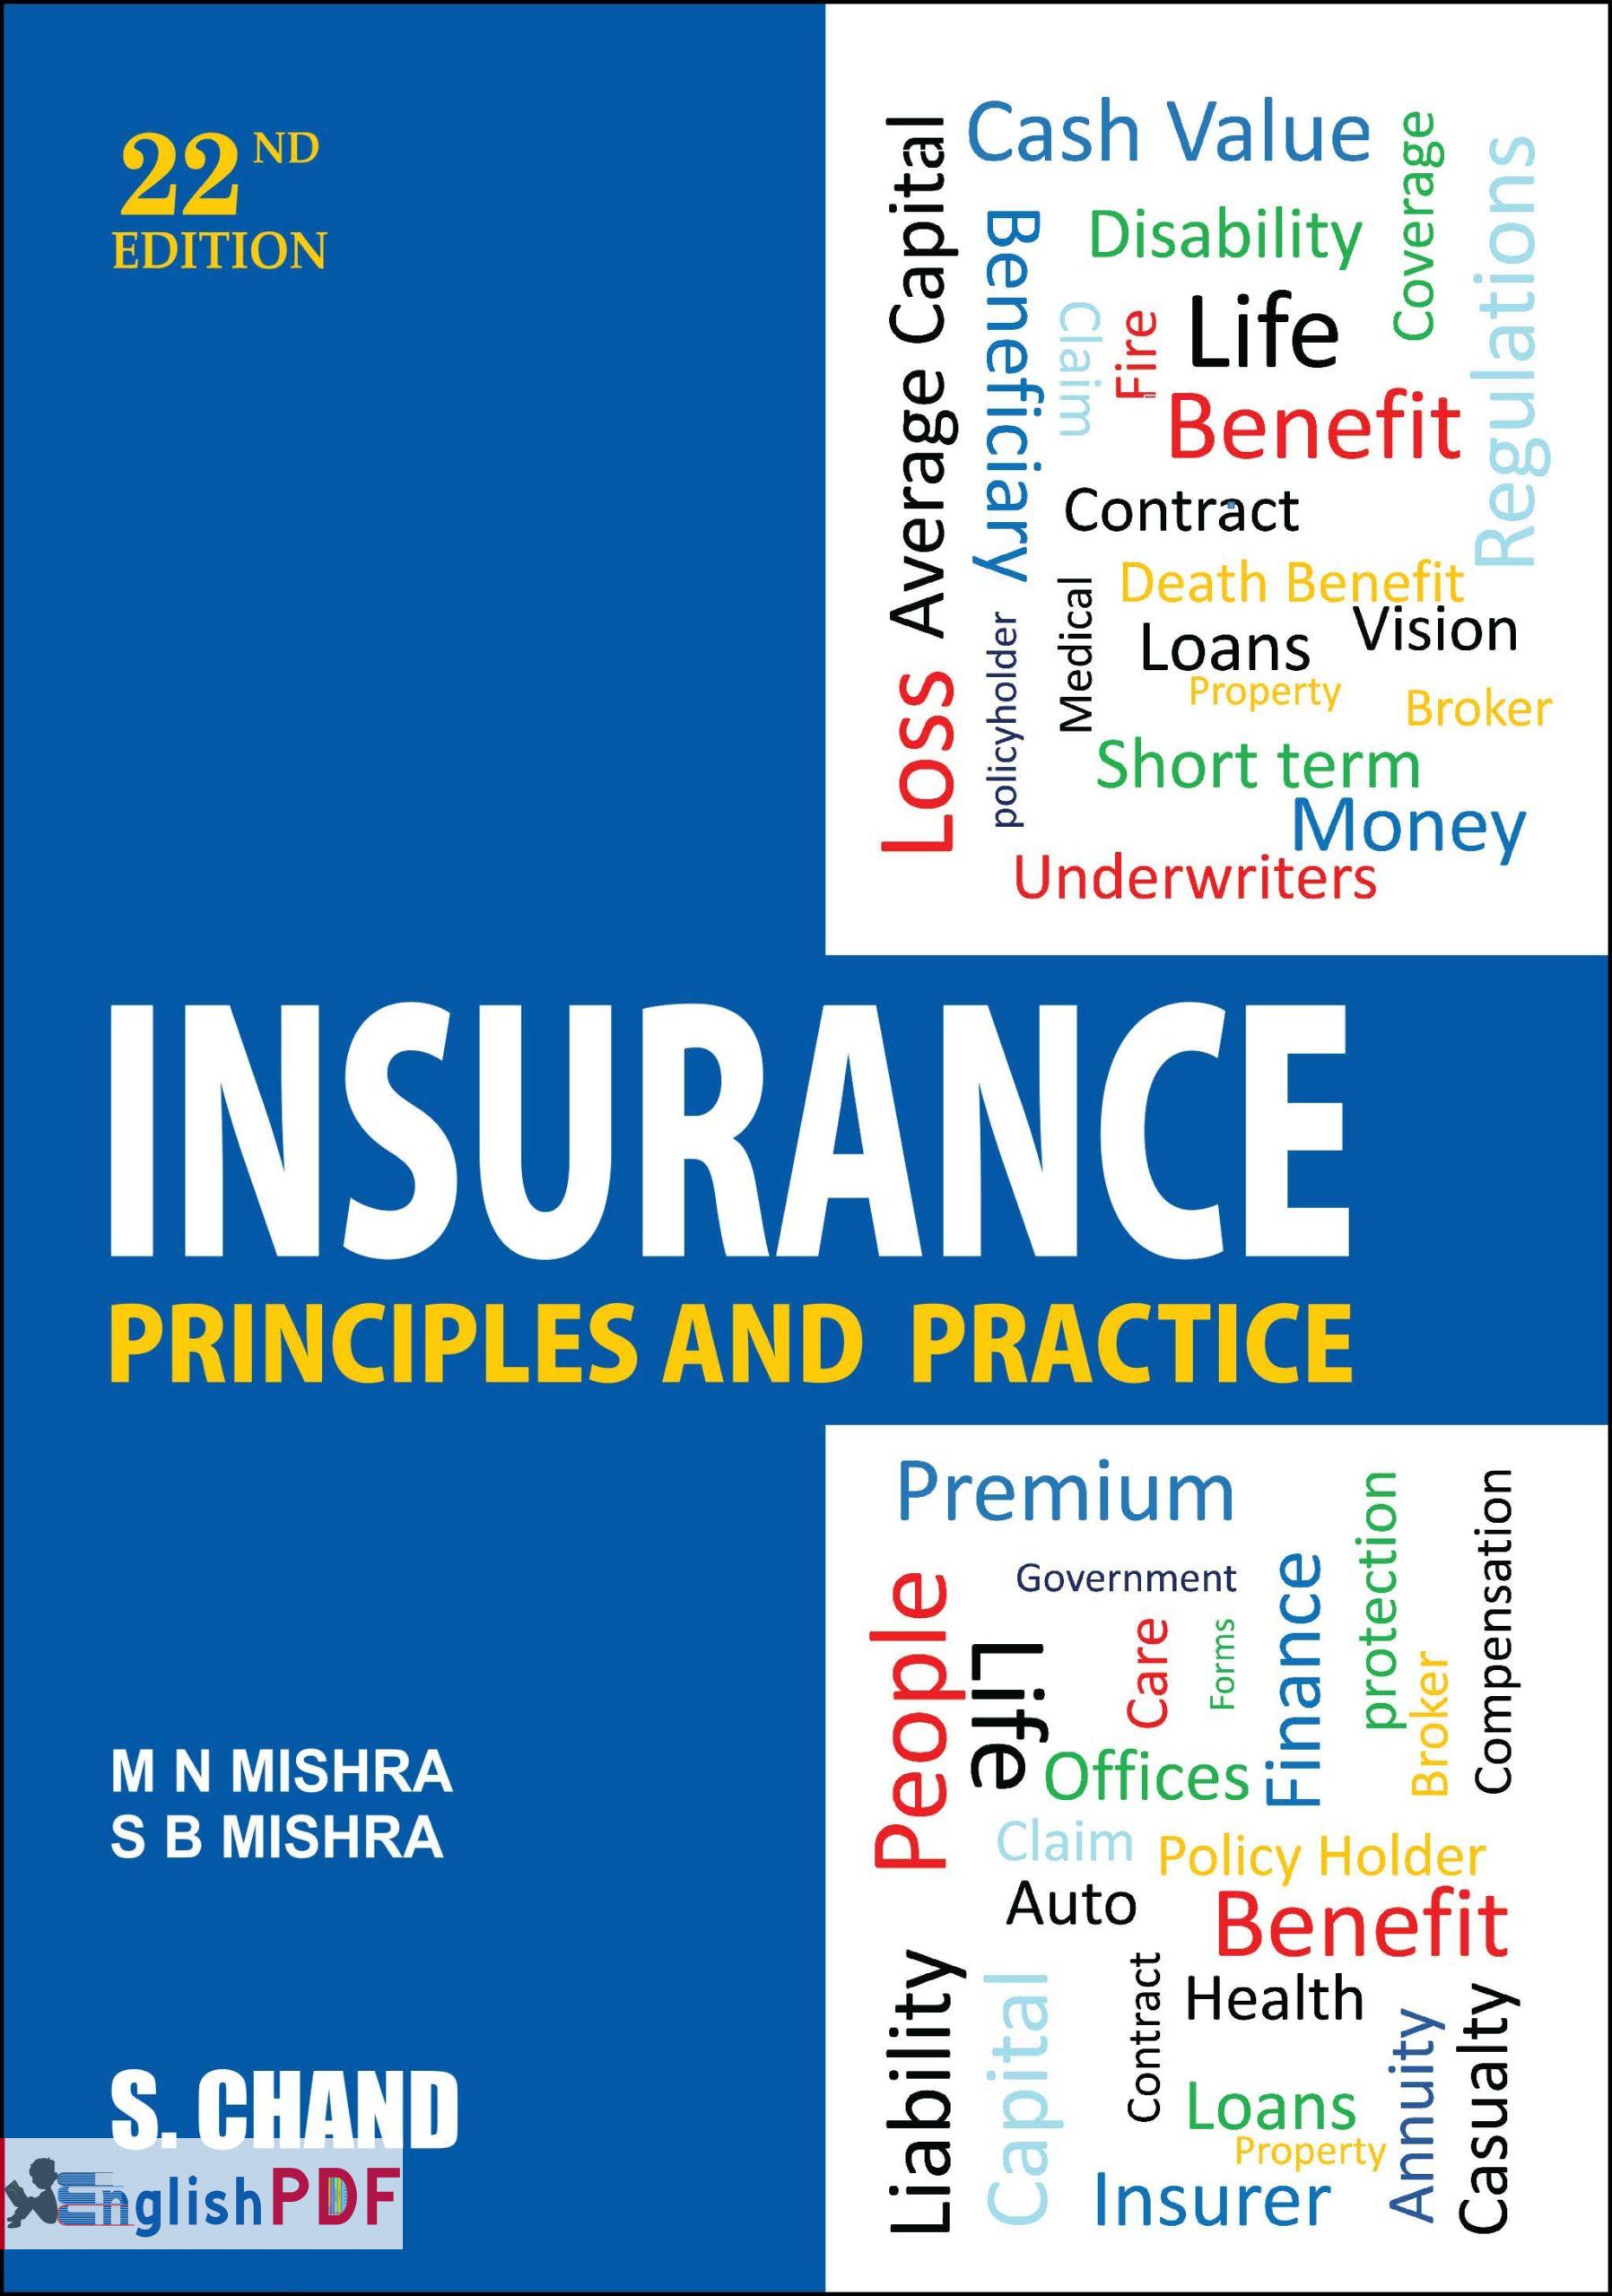 Principles and Practice of General Insurance PDF EnglishPDF